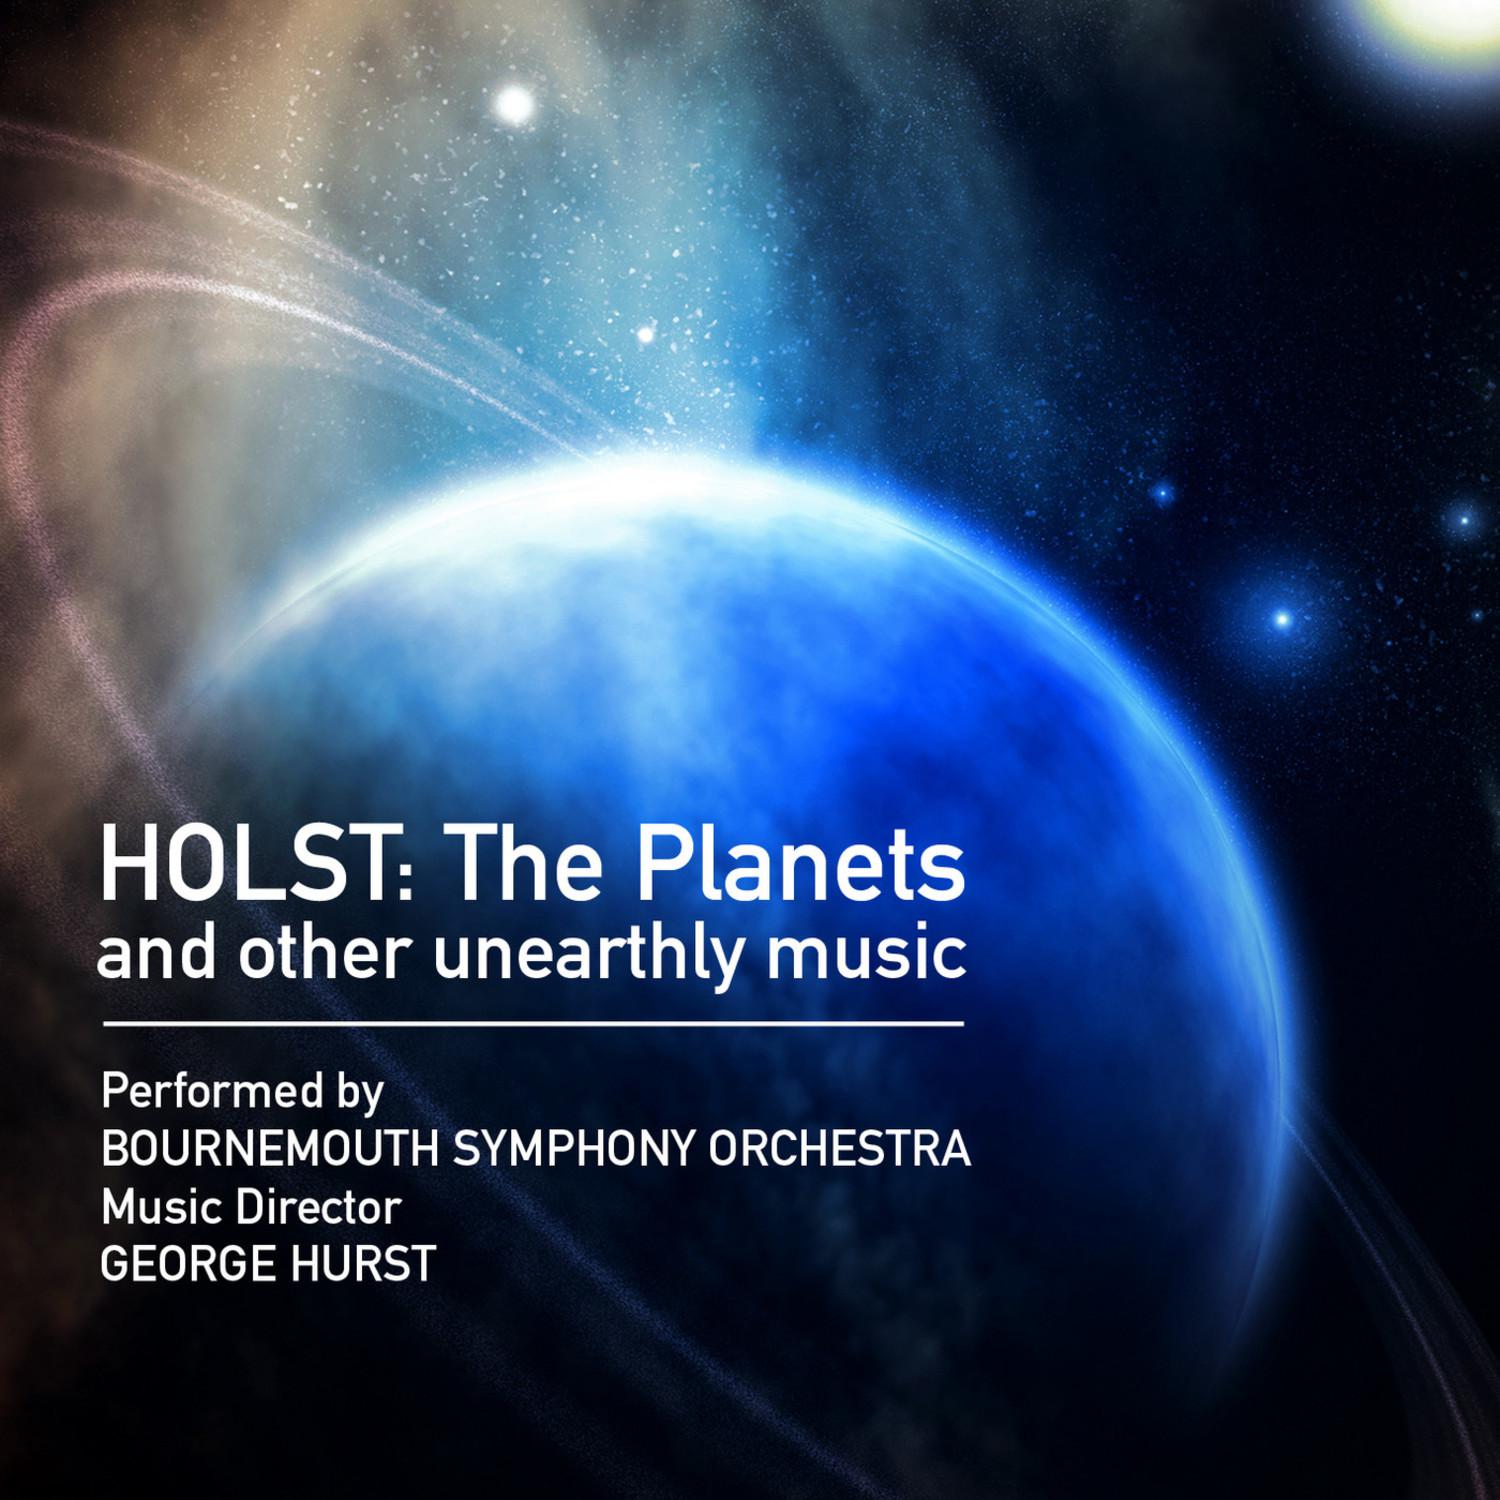 The Planets, Suite for Large Orchestra, Op. 32: IV. Jupiter - The Bringer Of Jollity